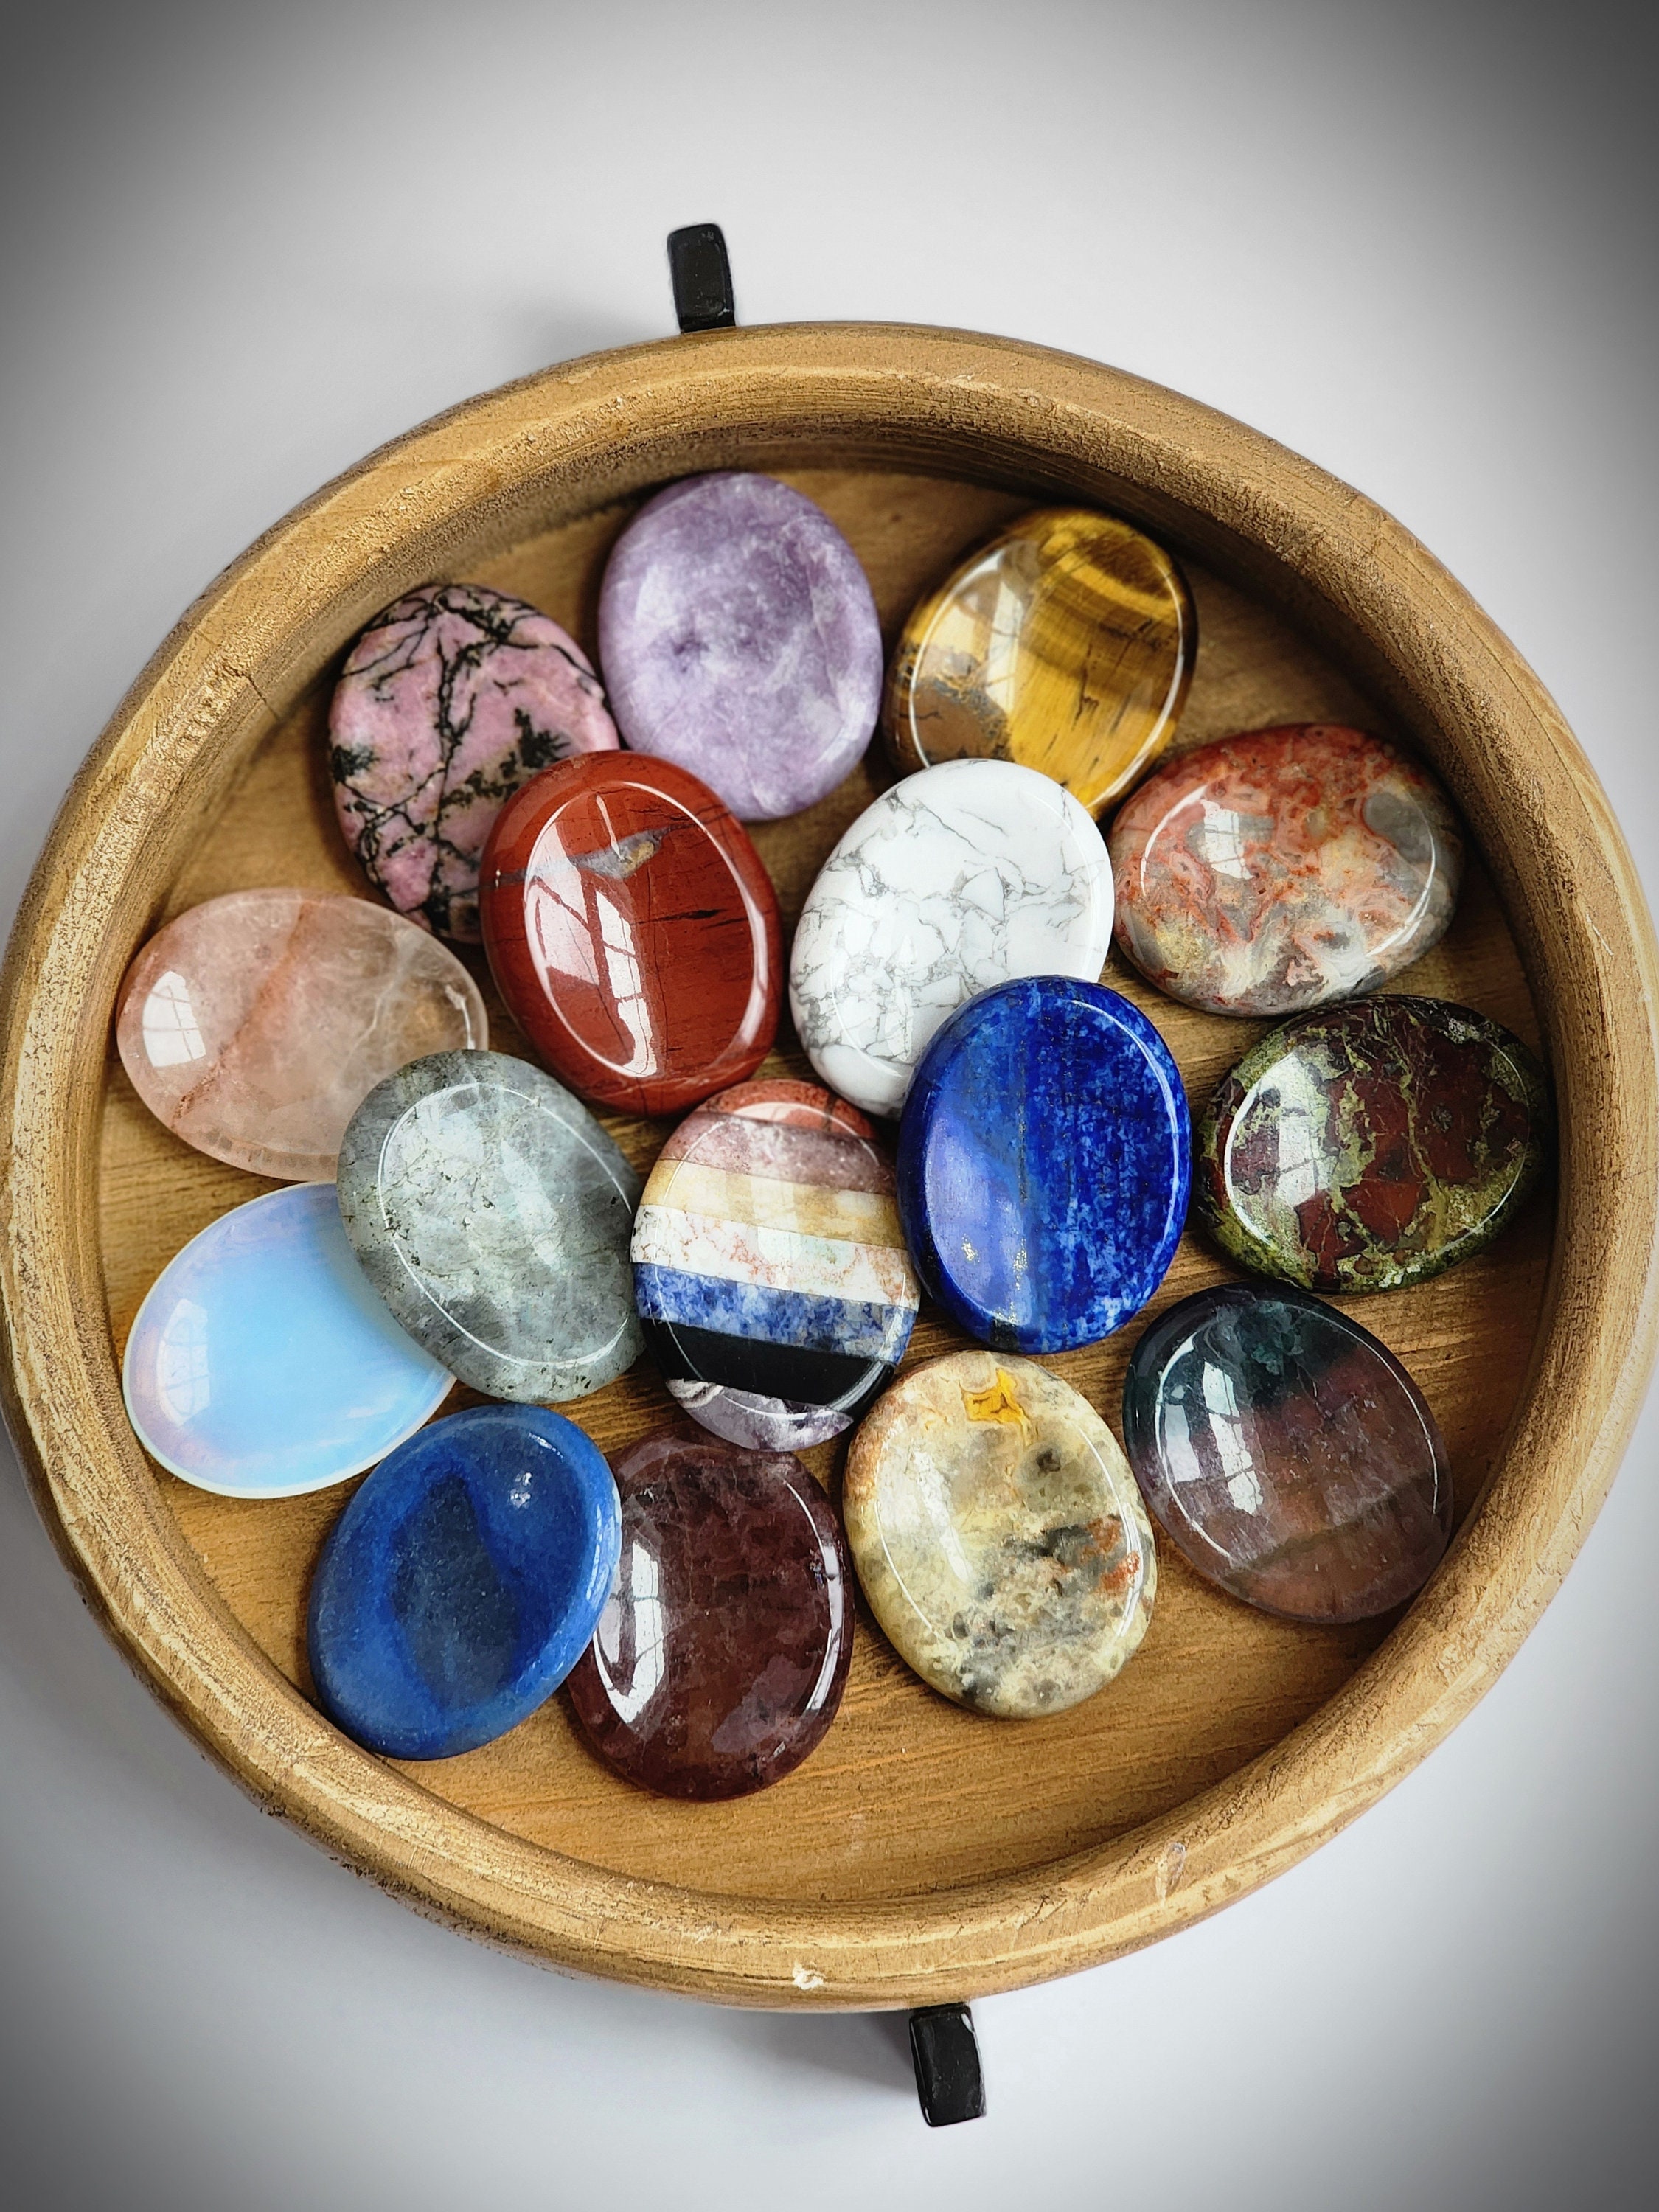 Mystery Crystal Box - Crystals, Bracelets, Palm Stones, Selenite, Palo  Santo, Tumble and Rough Stones! (Crystal Confetti, Crystal Gifts)